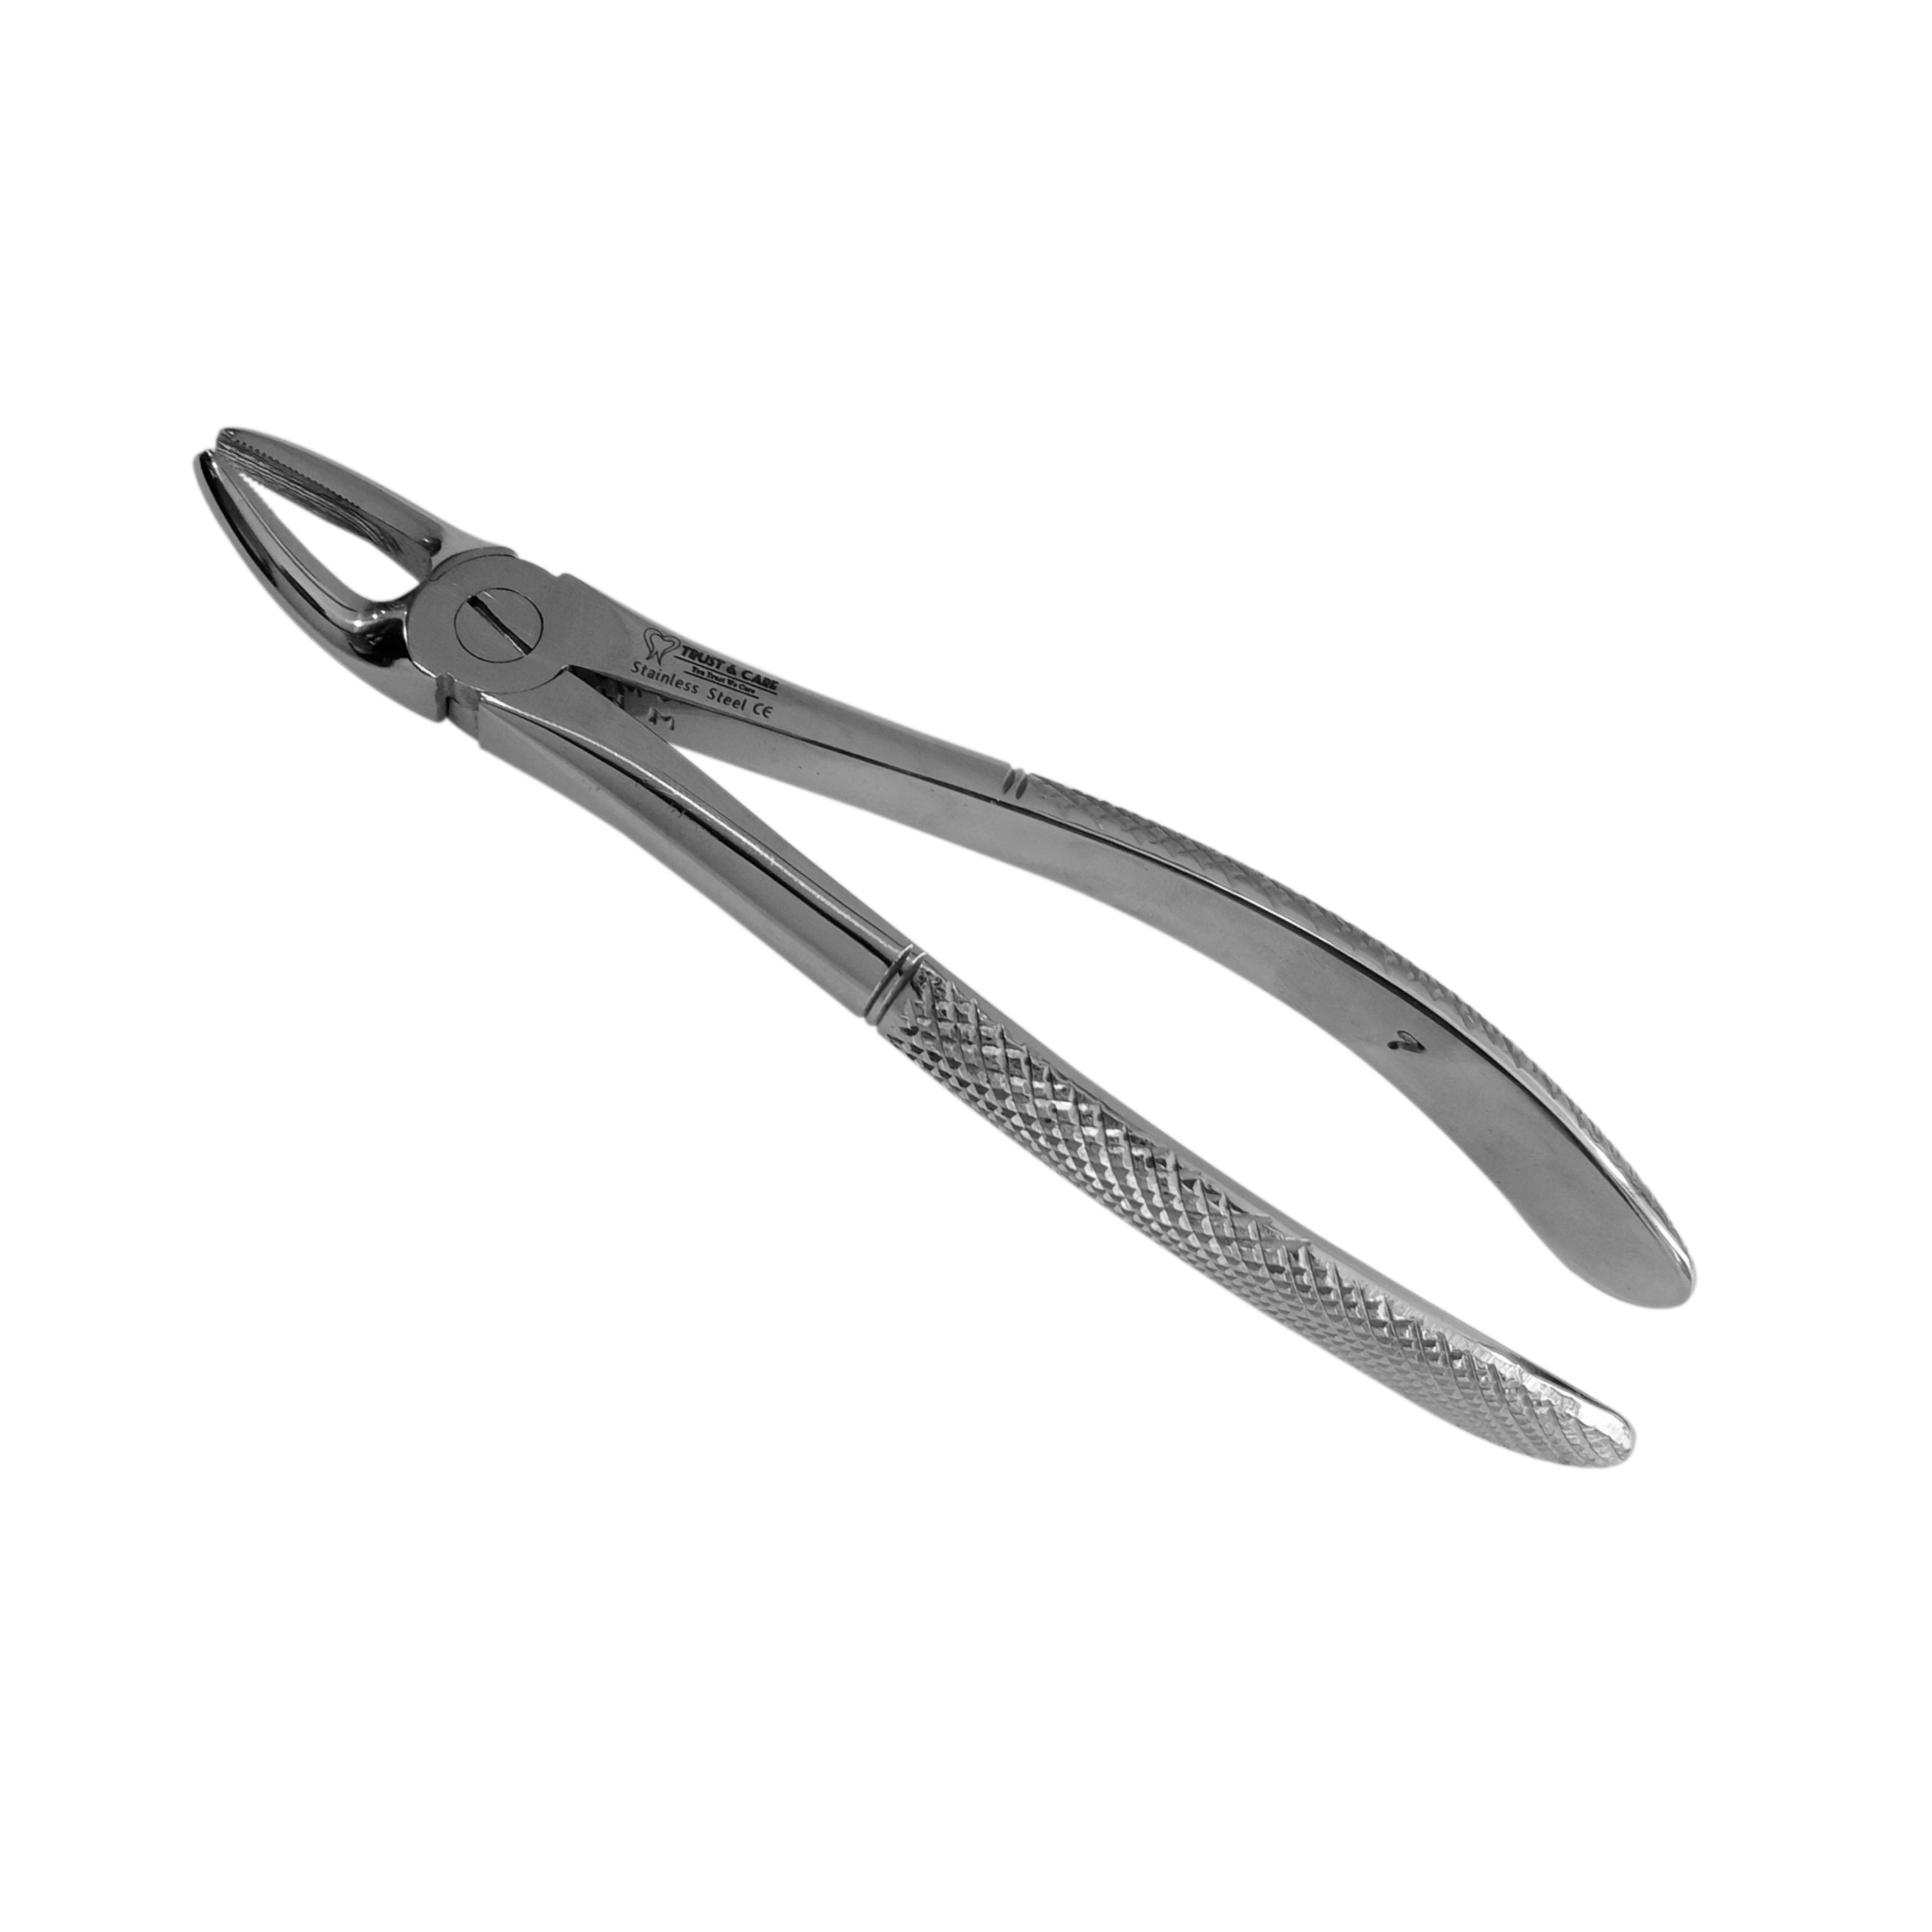 Trust & Care Tooth Extraction Forcep Upper Premolars Fig No. 7 Standard